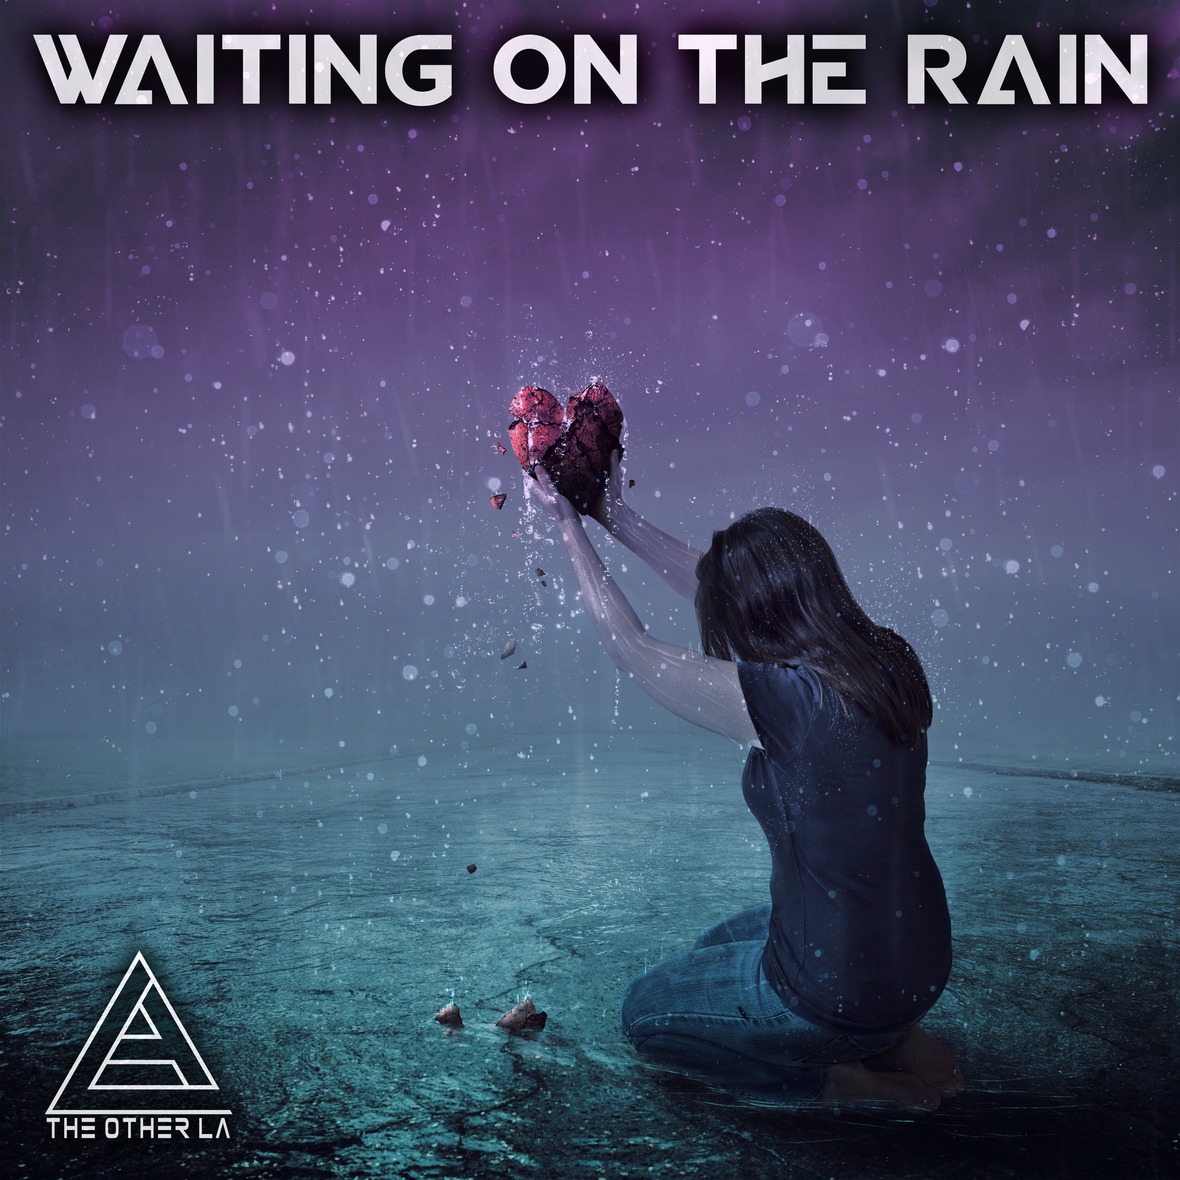 The Other LA - "Waiting On The Rain"